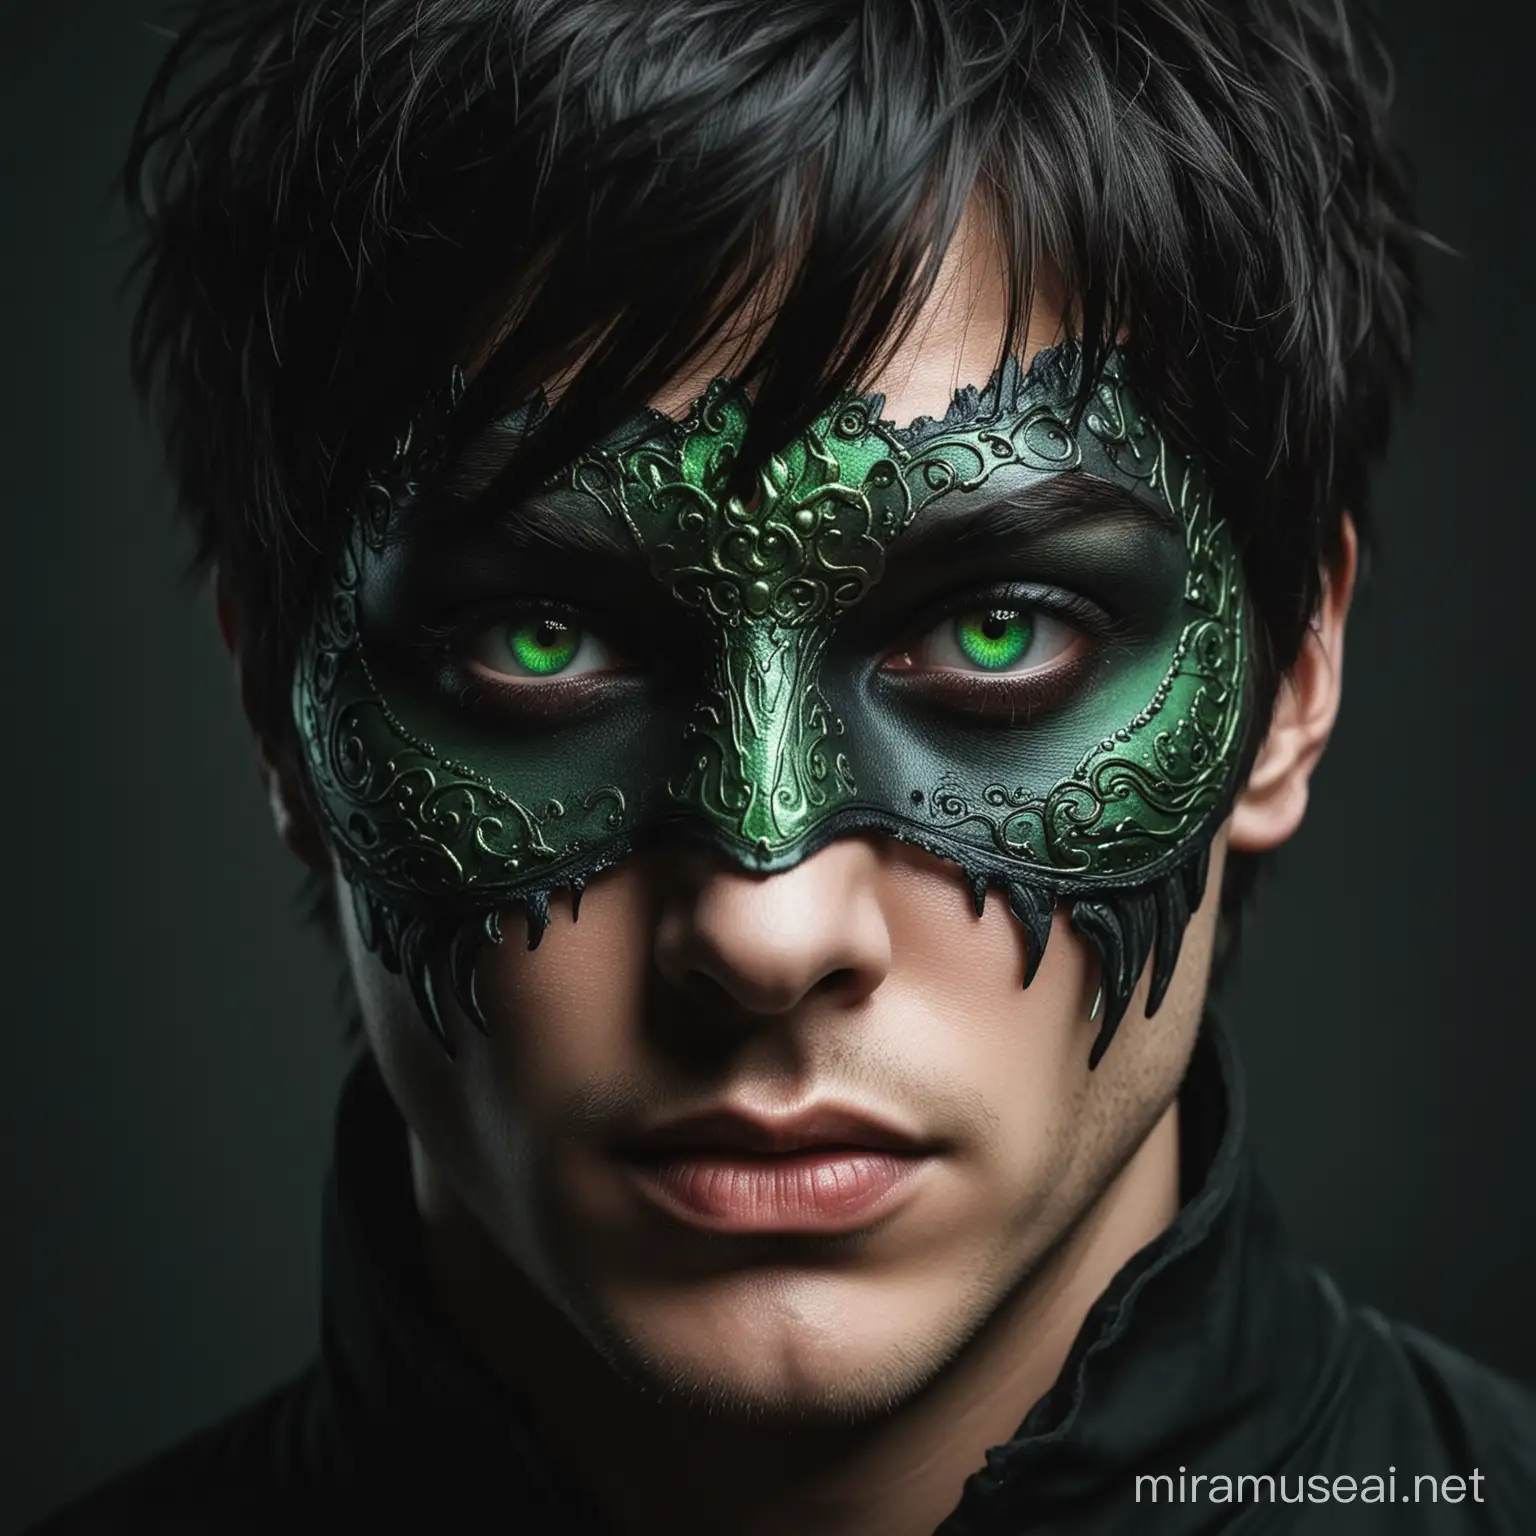 Mysterious Aesthetic Masked Man with Chameleon Eyes